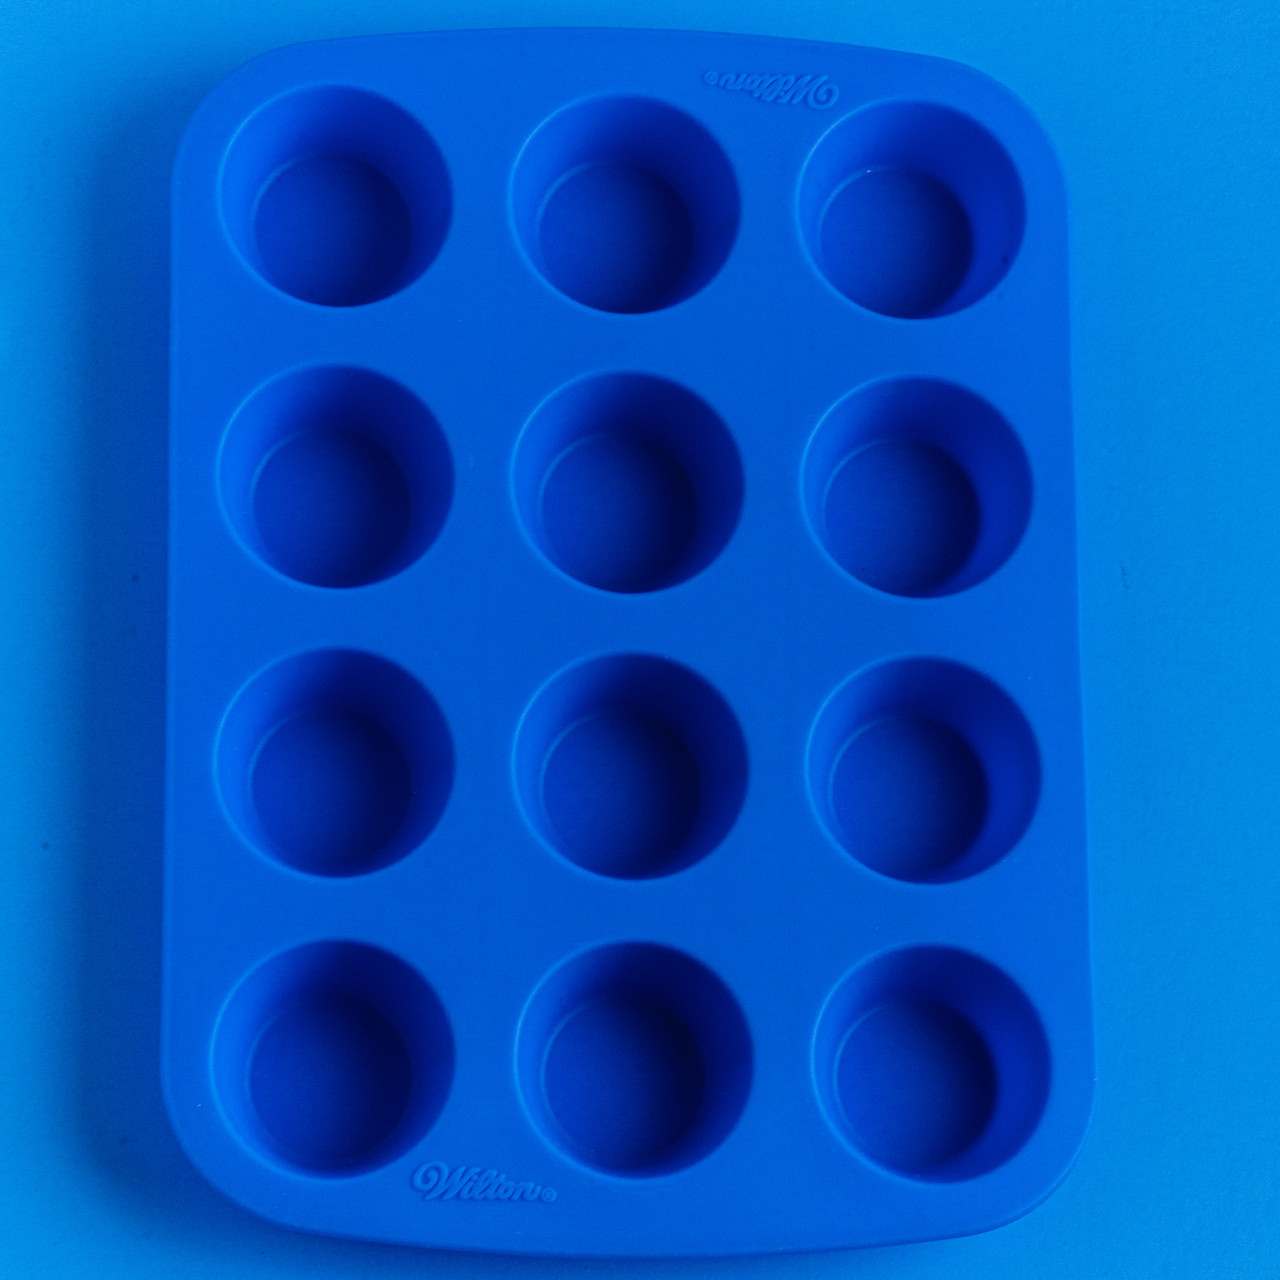 https://cdn11.bigcommerce.com/s-74757430ww/images/stencil/1280x1280/products/1762/6530/Silicone-Soap-Mold-Mini-Muffin-1__88634.1666724725.jpg?c=1